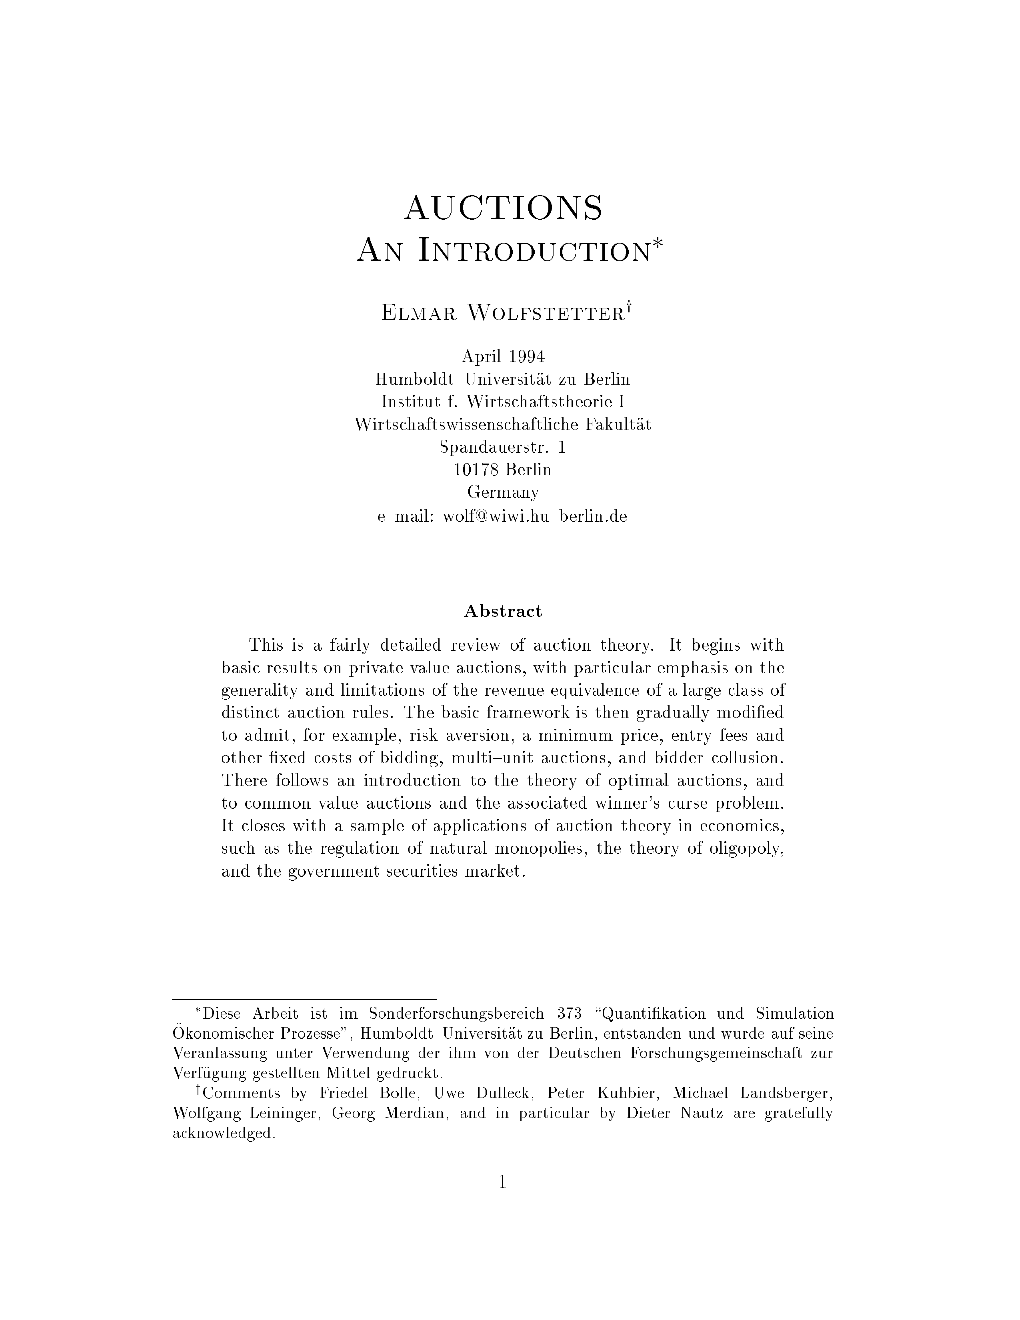 AUCTIONS an Introduction